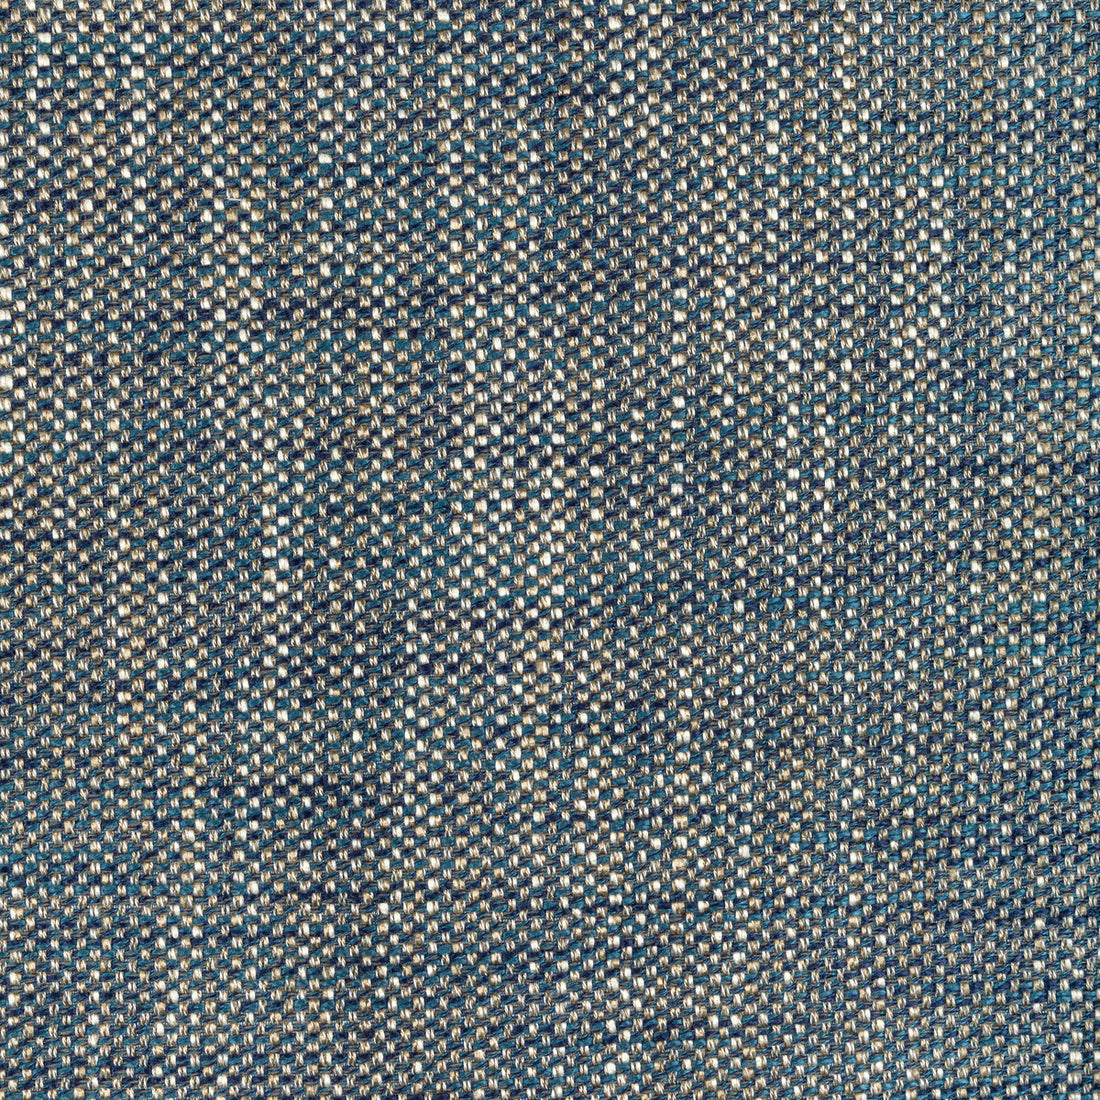 Kravet Design fabric in 36414-511 color - pattern 36414.511.0 - by Kravet Design in the Performance Crypton Home collection